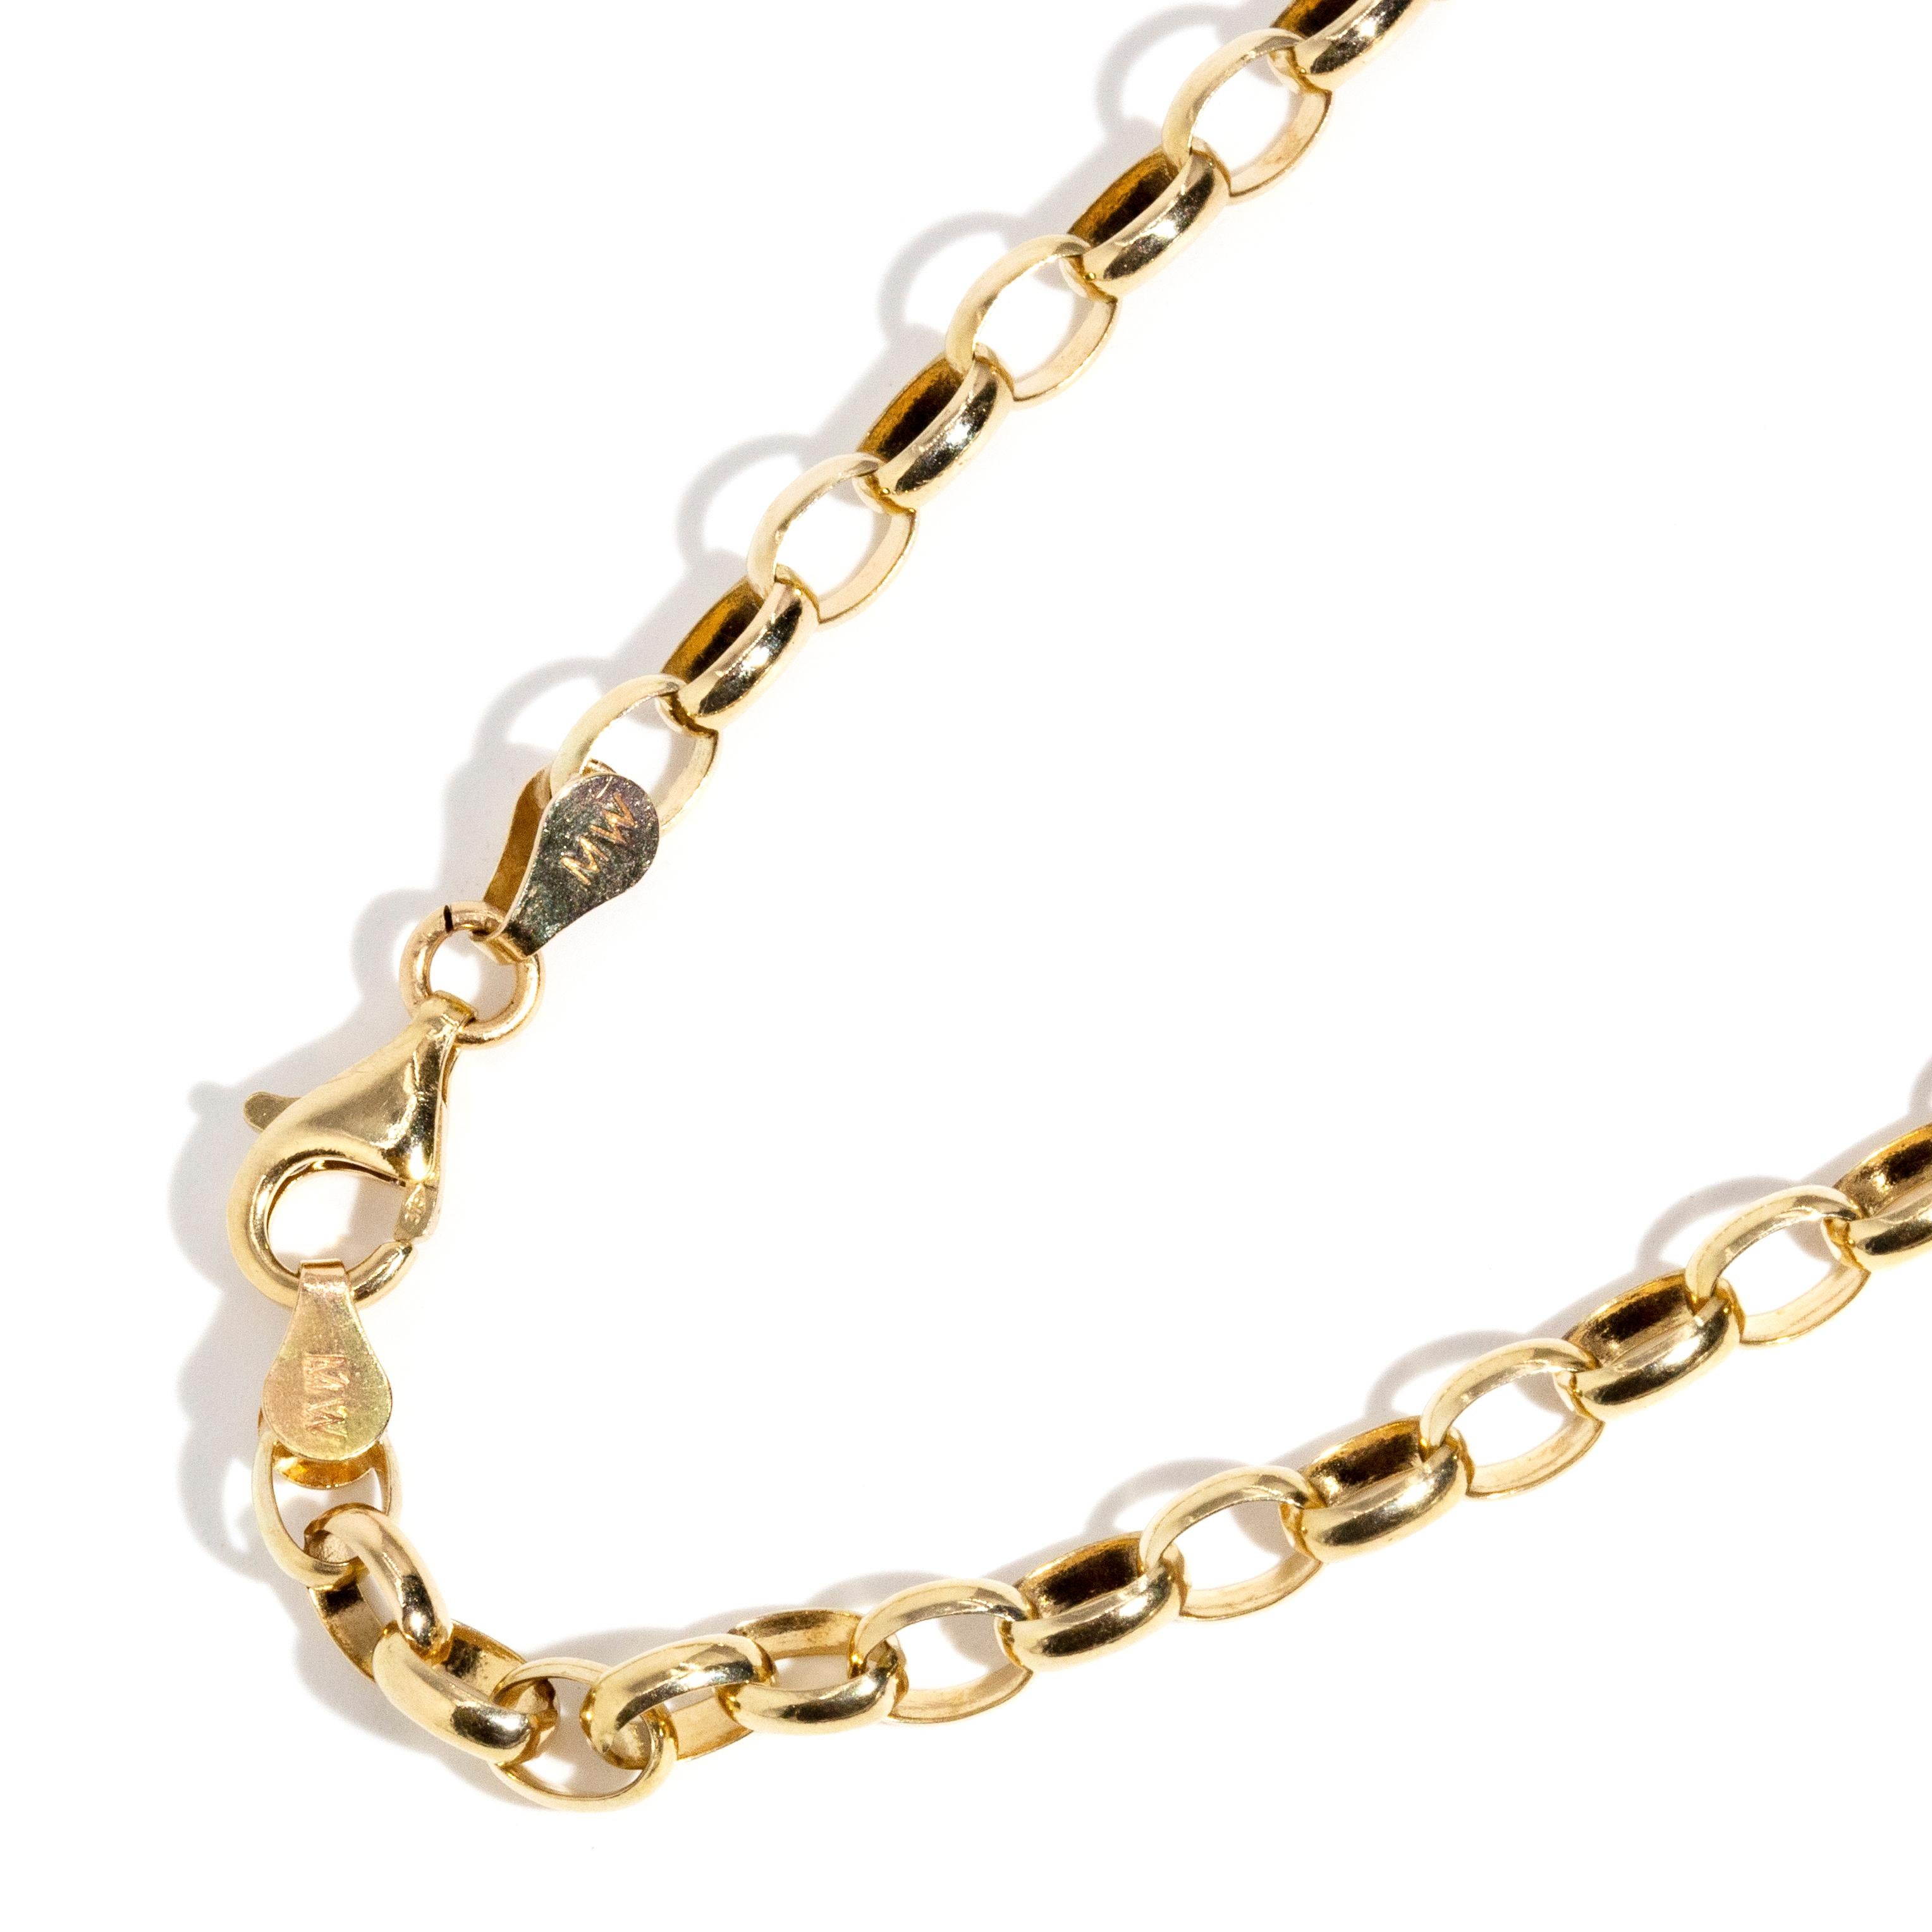 Vintage Circa 1980s Diamond Cut Heavy Oval Link Chain 9 Carat Yellow Gold For Sale 4